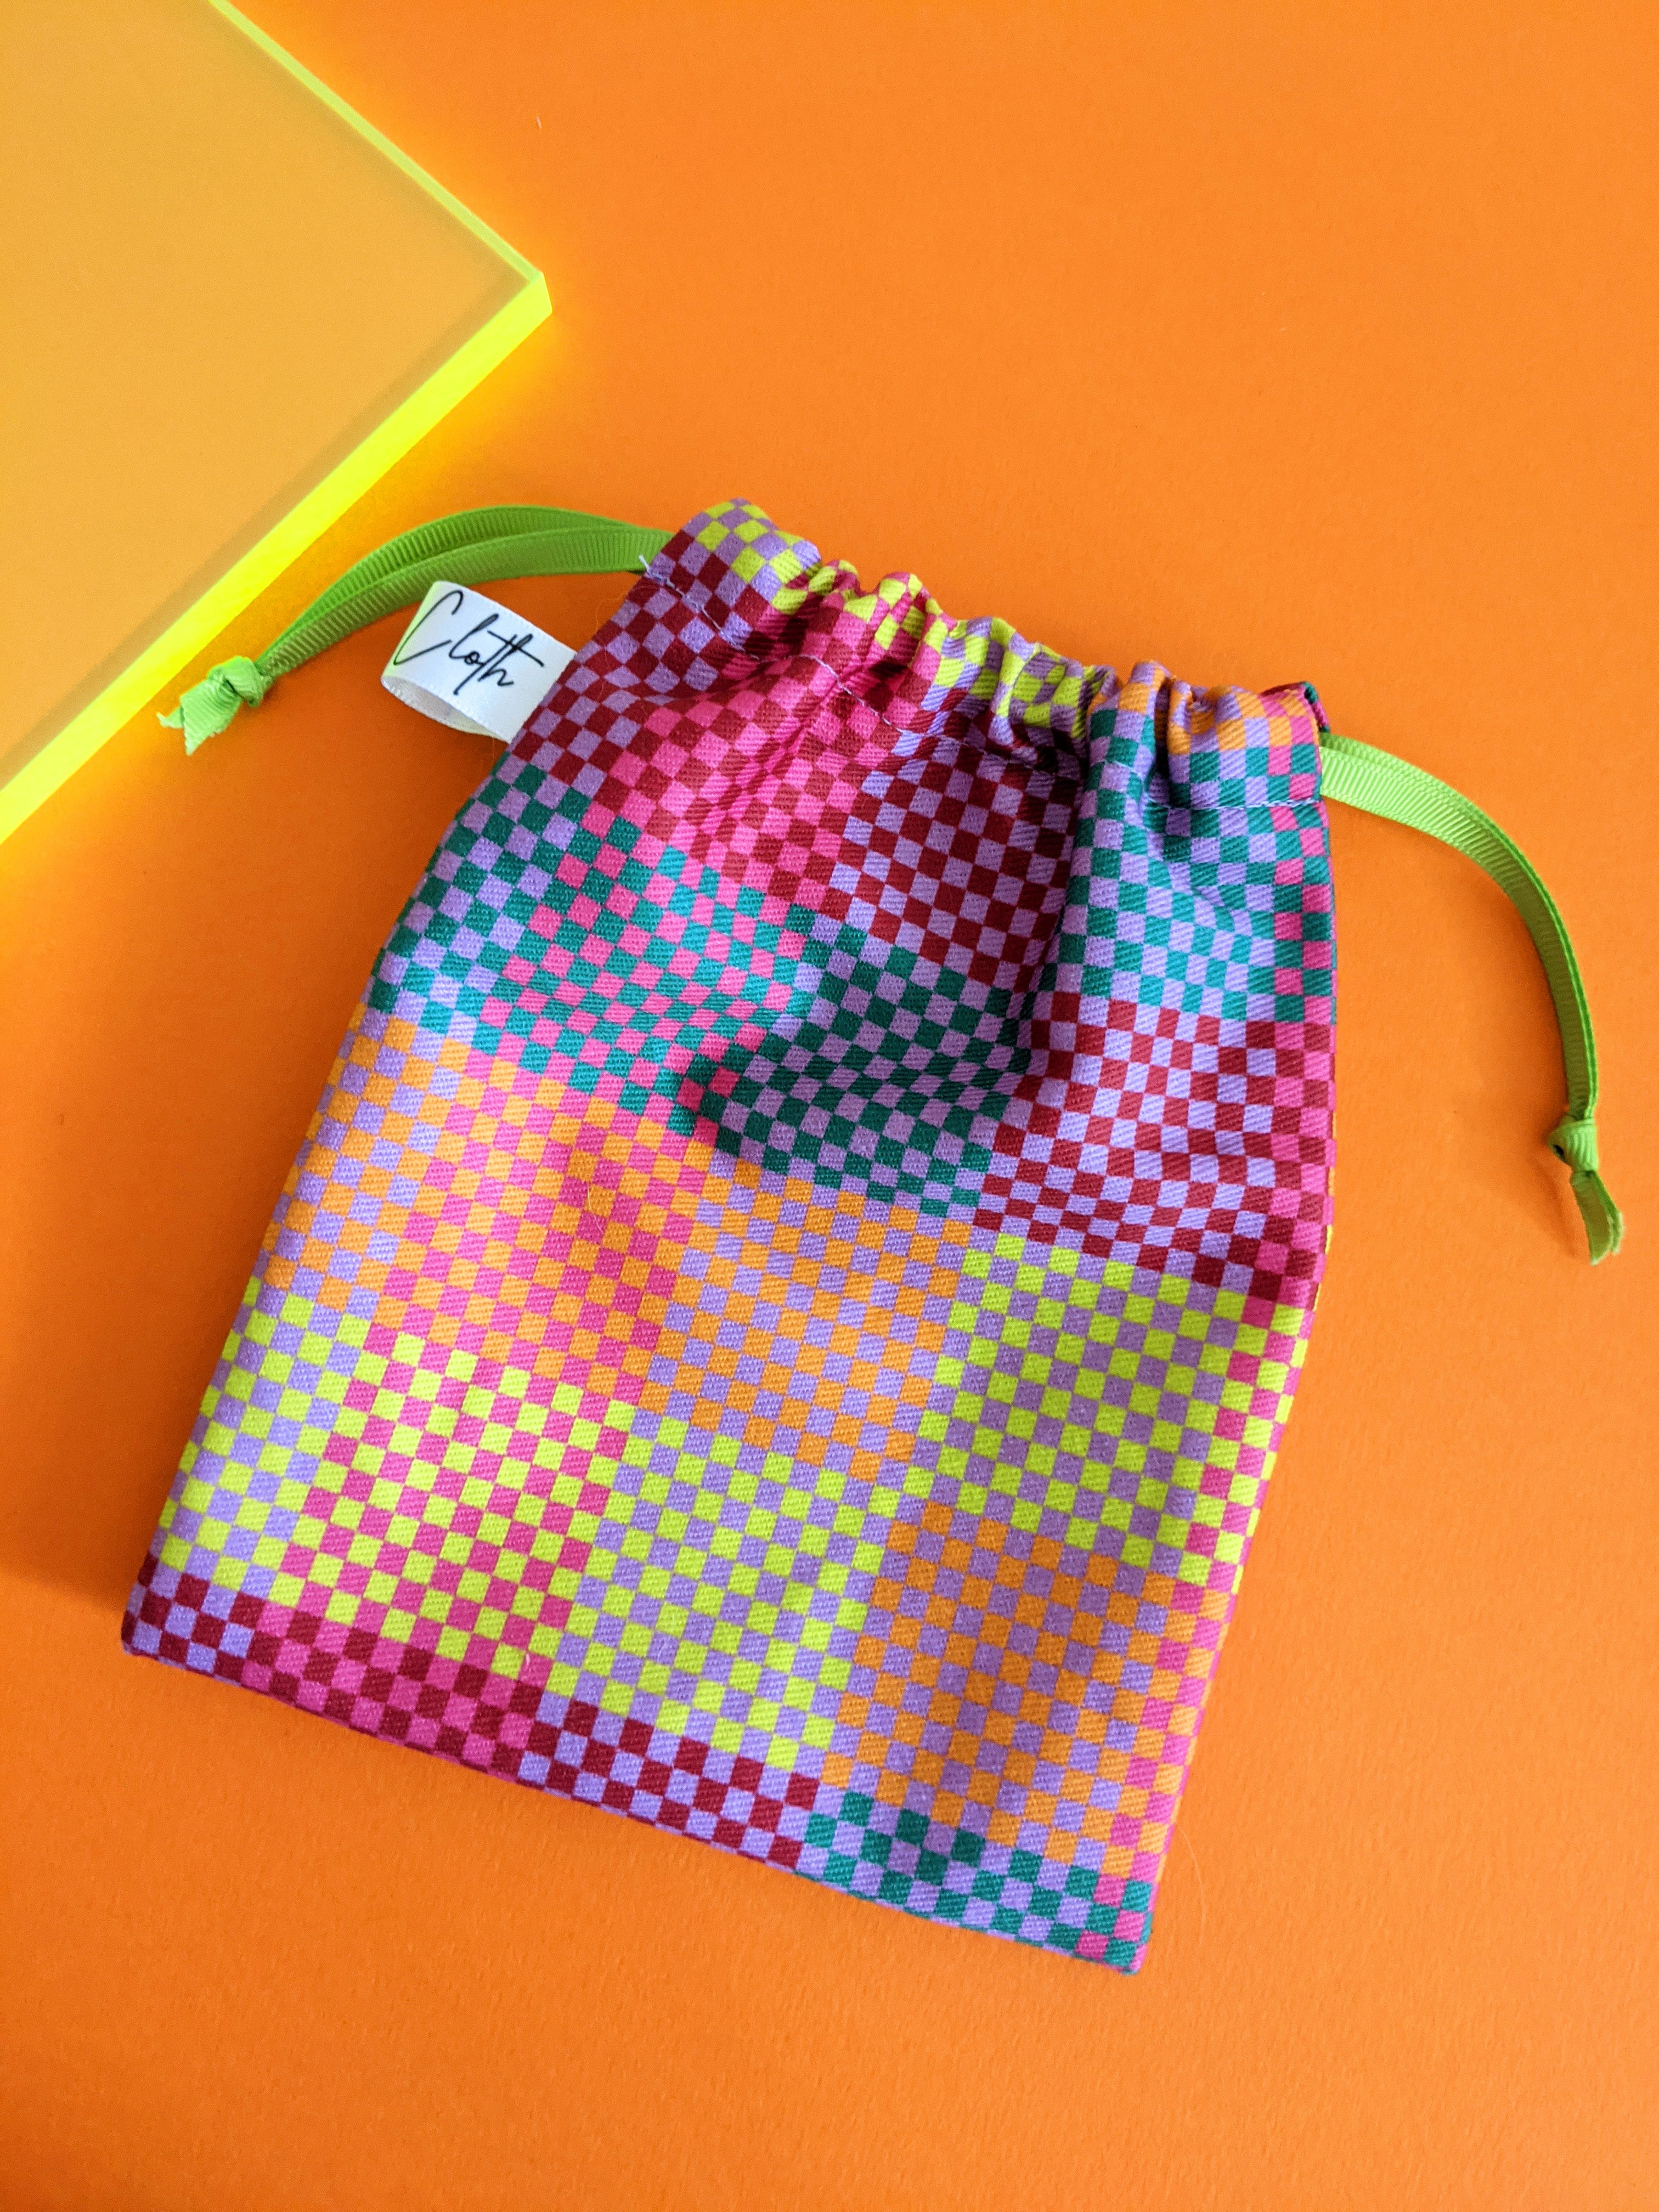 Pixel Pouch Bag with make-up removal pads